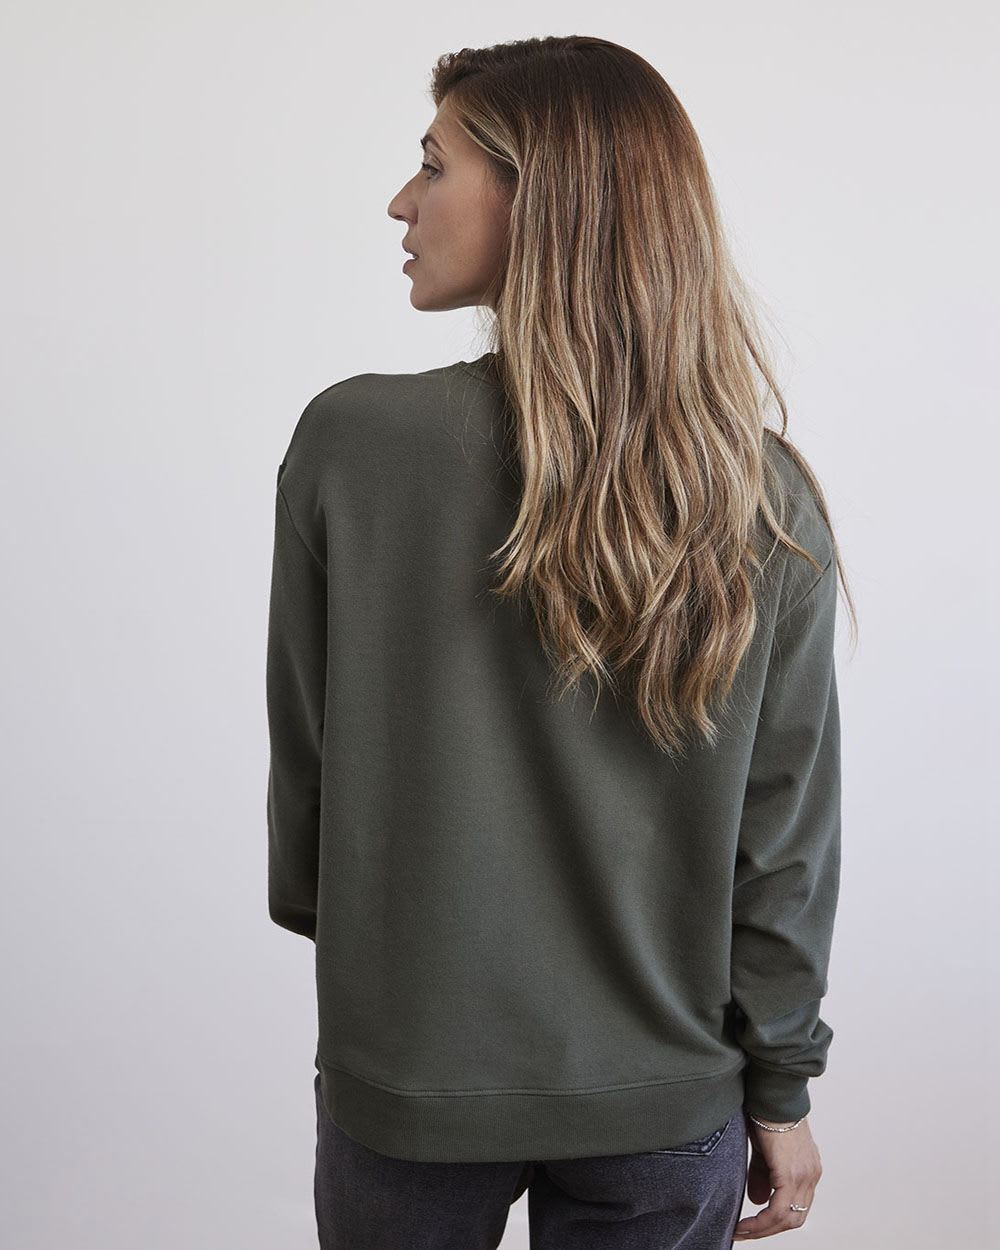 Relaxed-Fit French Terry "Super Mom" Sweatshirt - Thyme Maternity